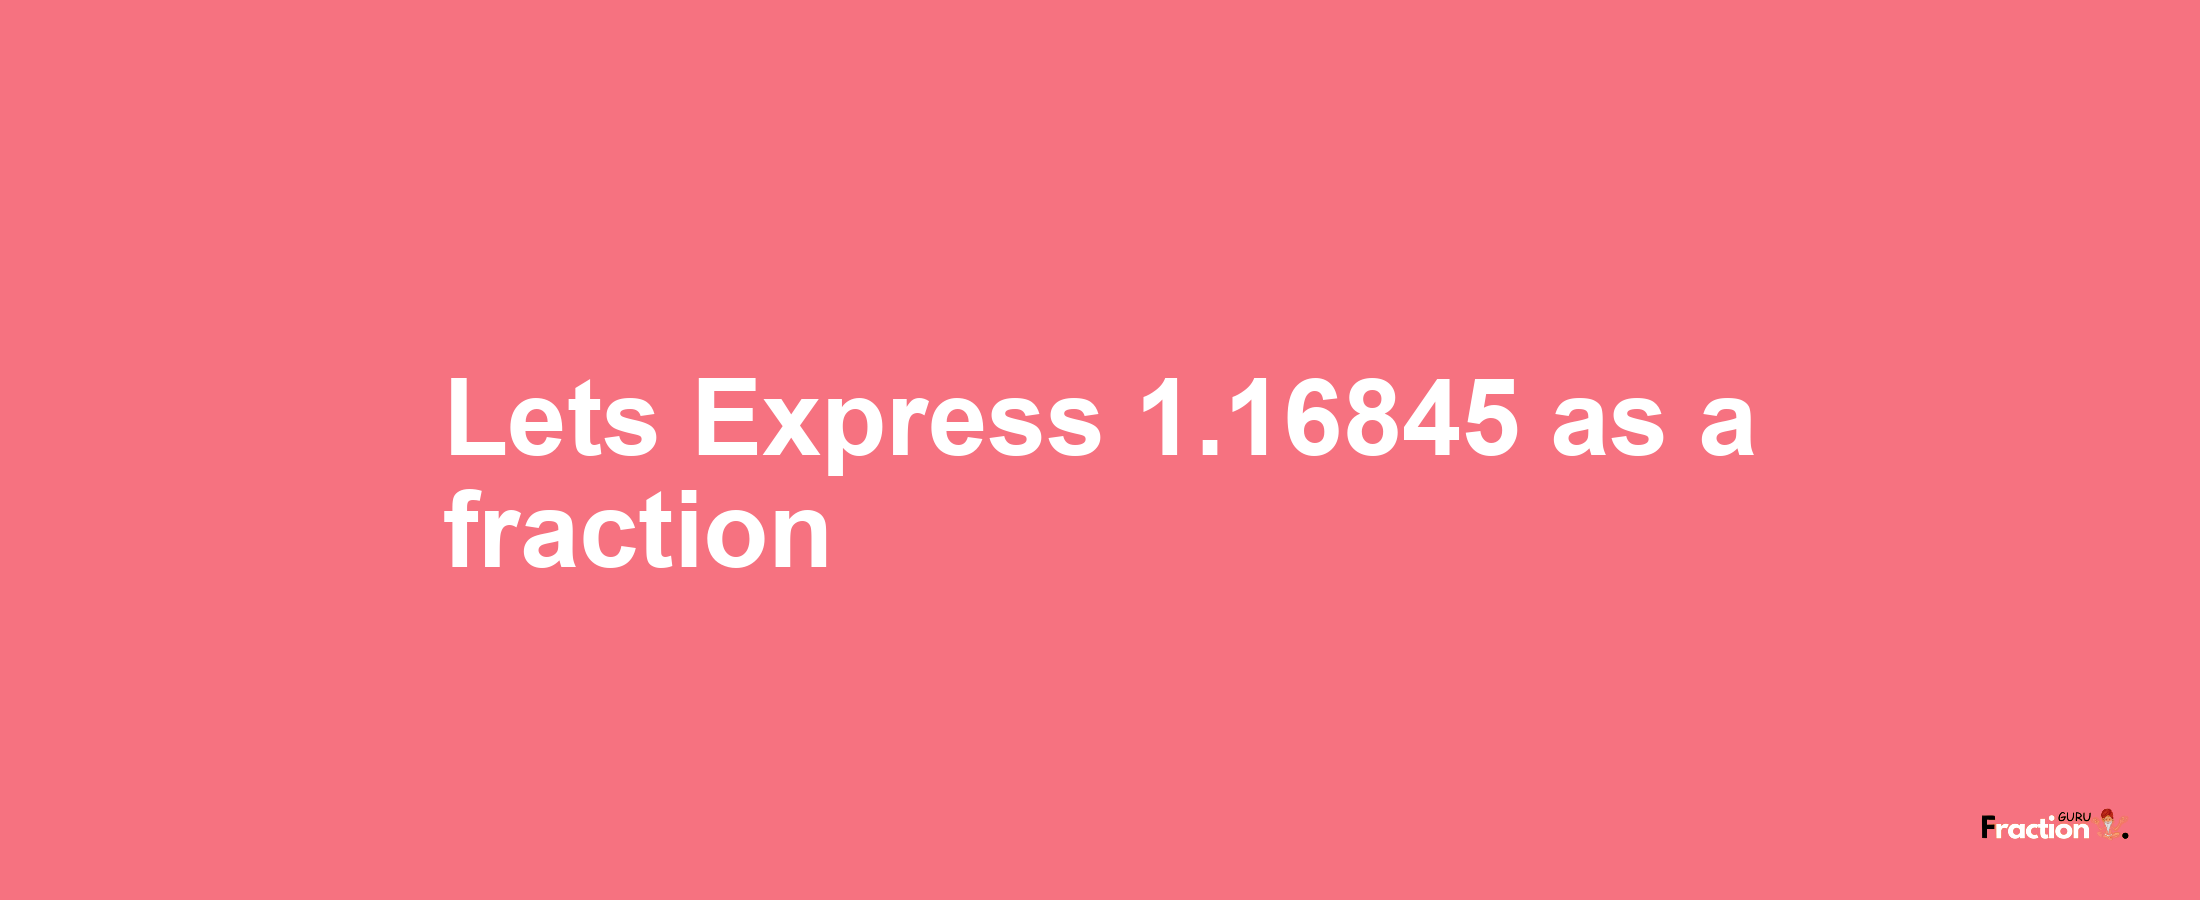 Lets Express 1.16845 as afraction